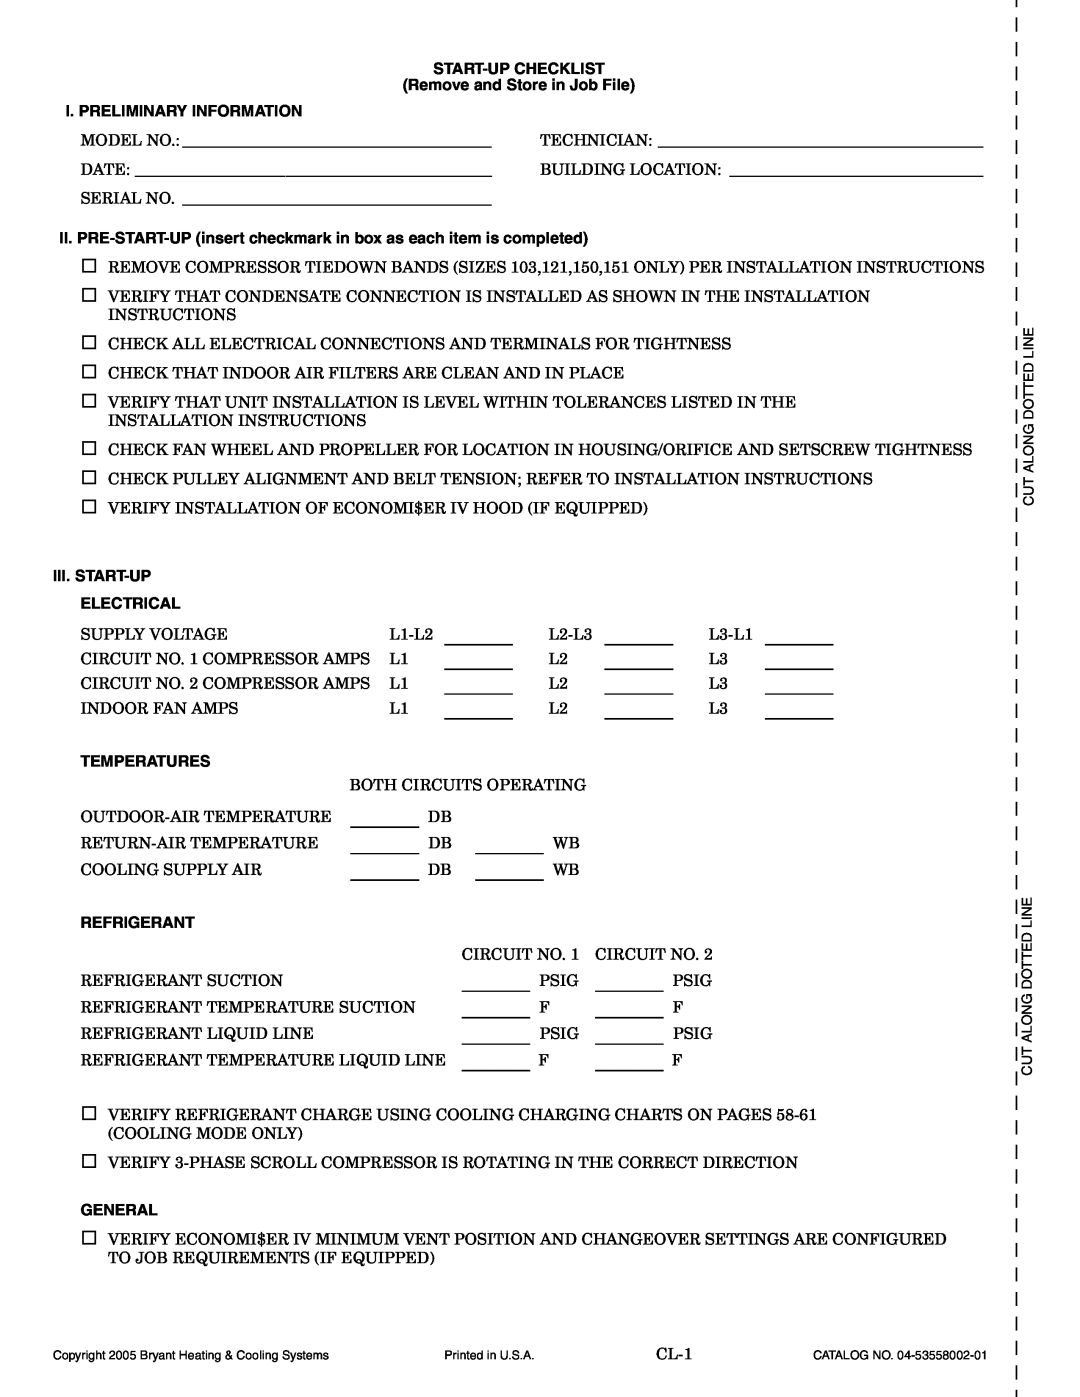 Bryant 558F START-UPCHECKLIST Remove and Store in Job File, I. Preliminary Information, Iii. Start-Up, Electrical, General 